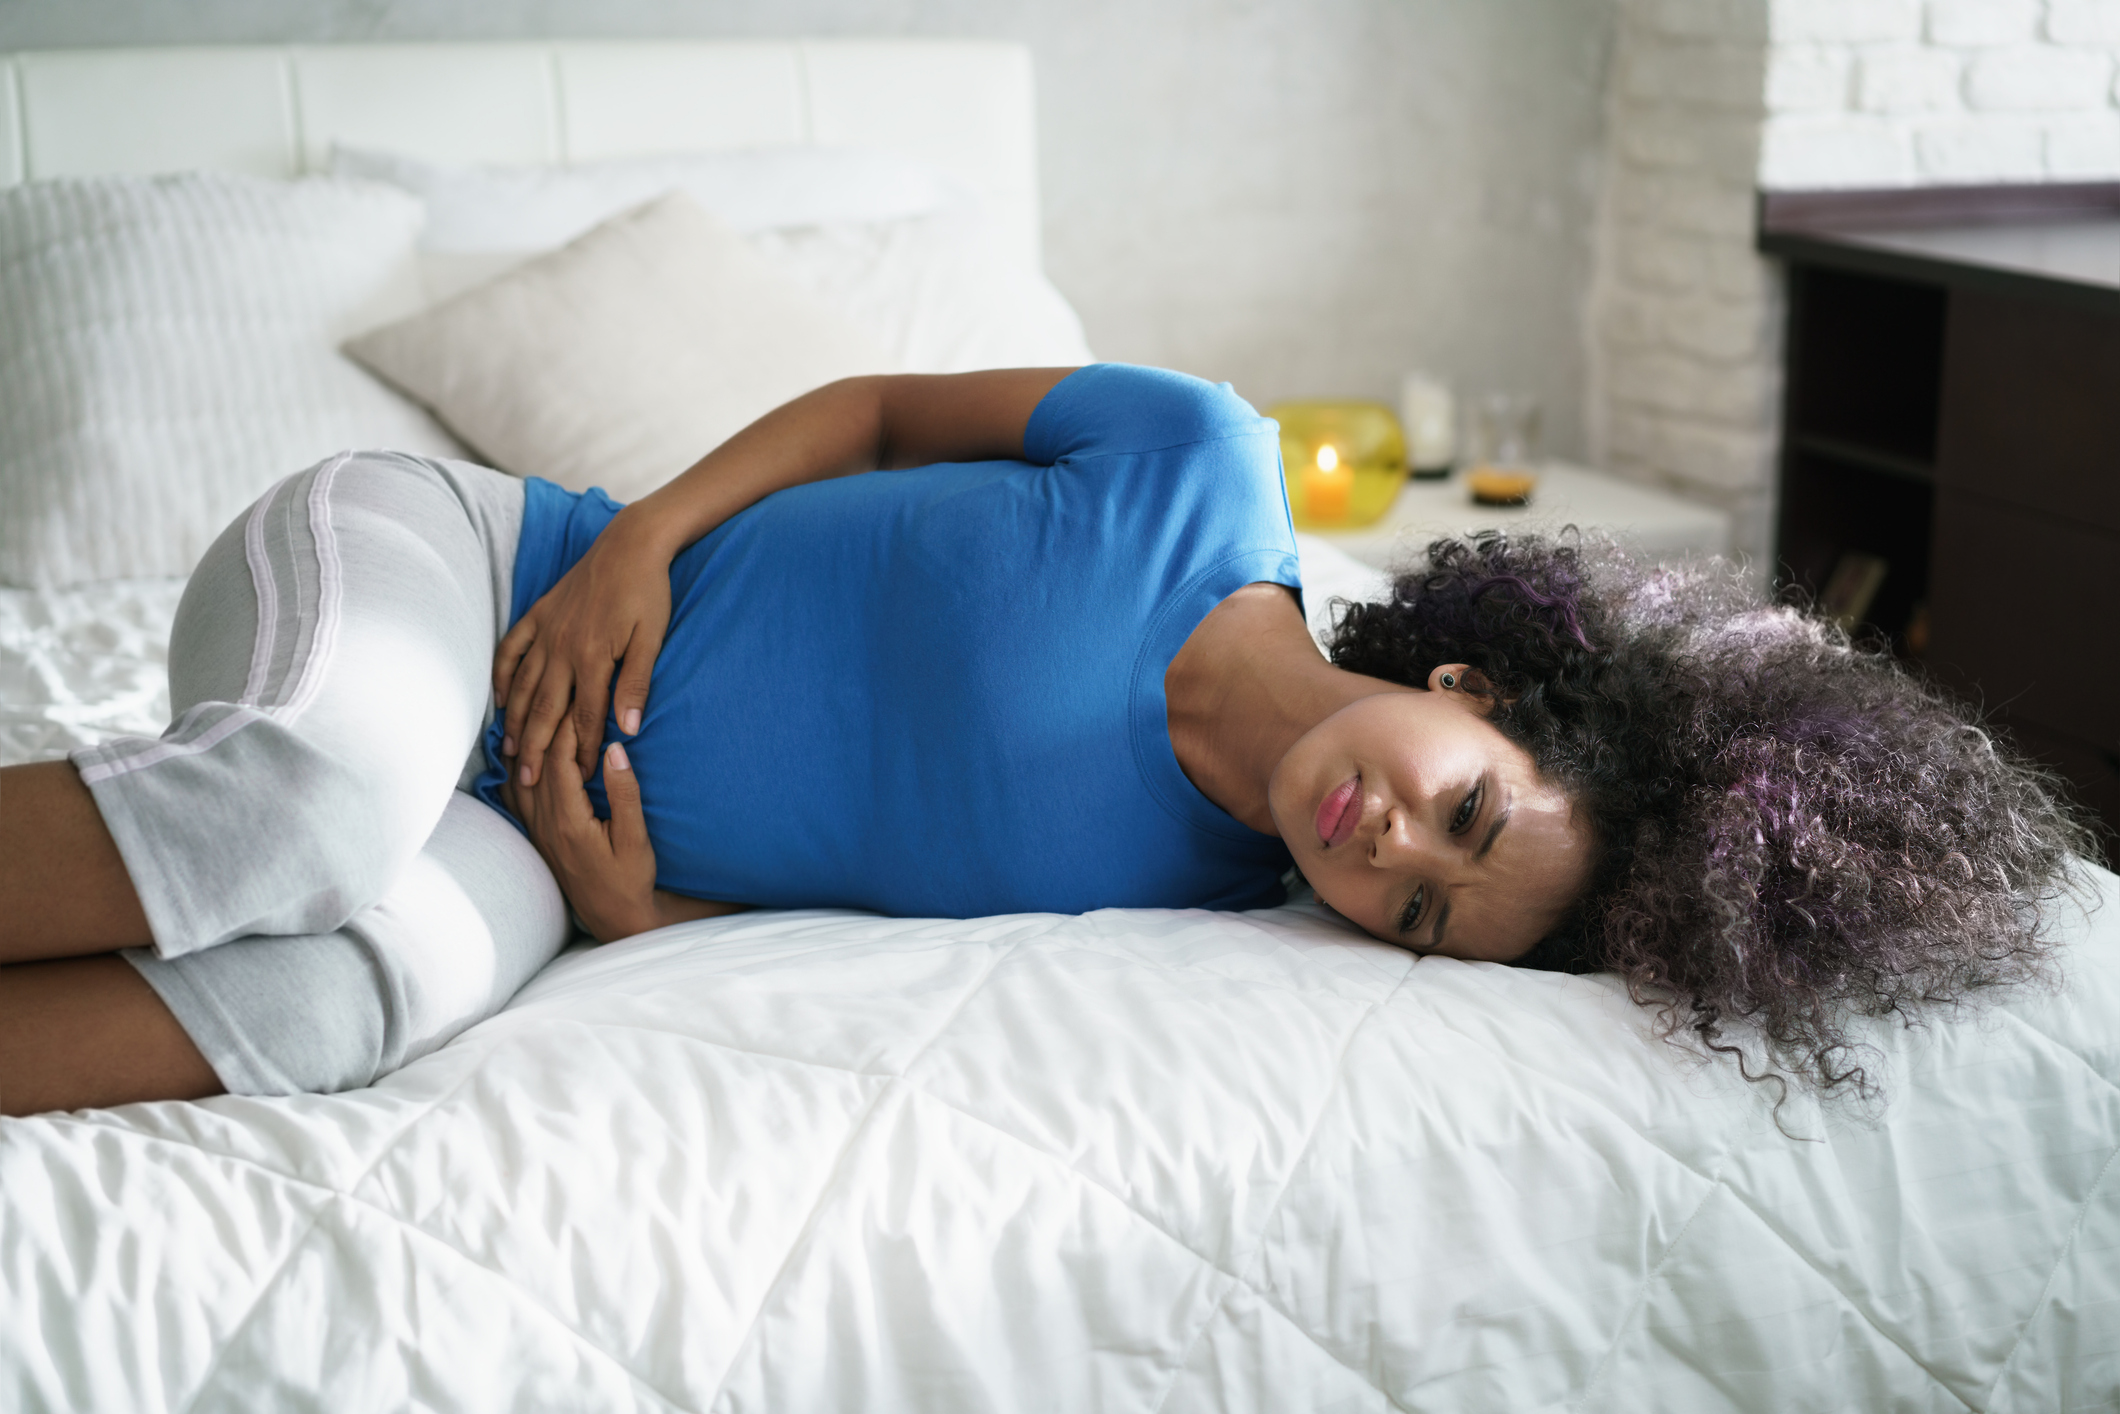 What You Need to Know About Heavy Menstrual Bleeding